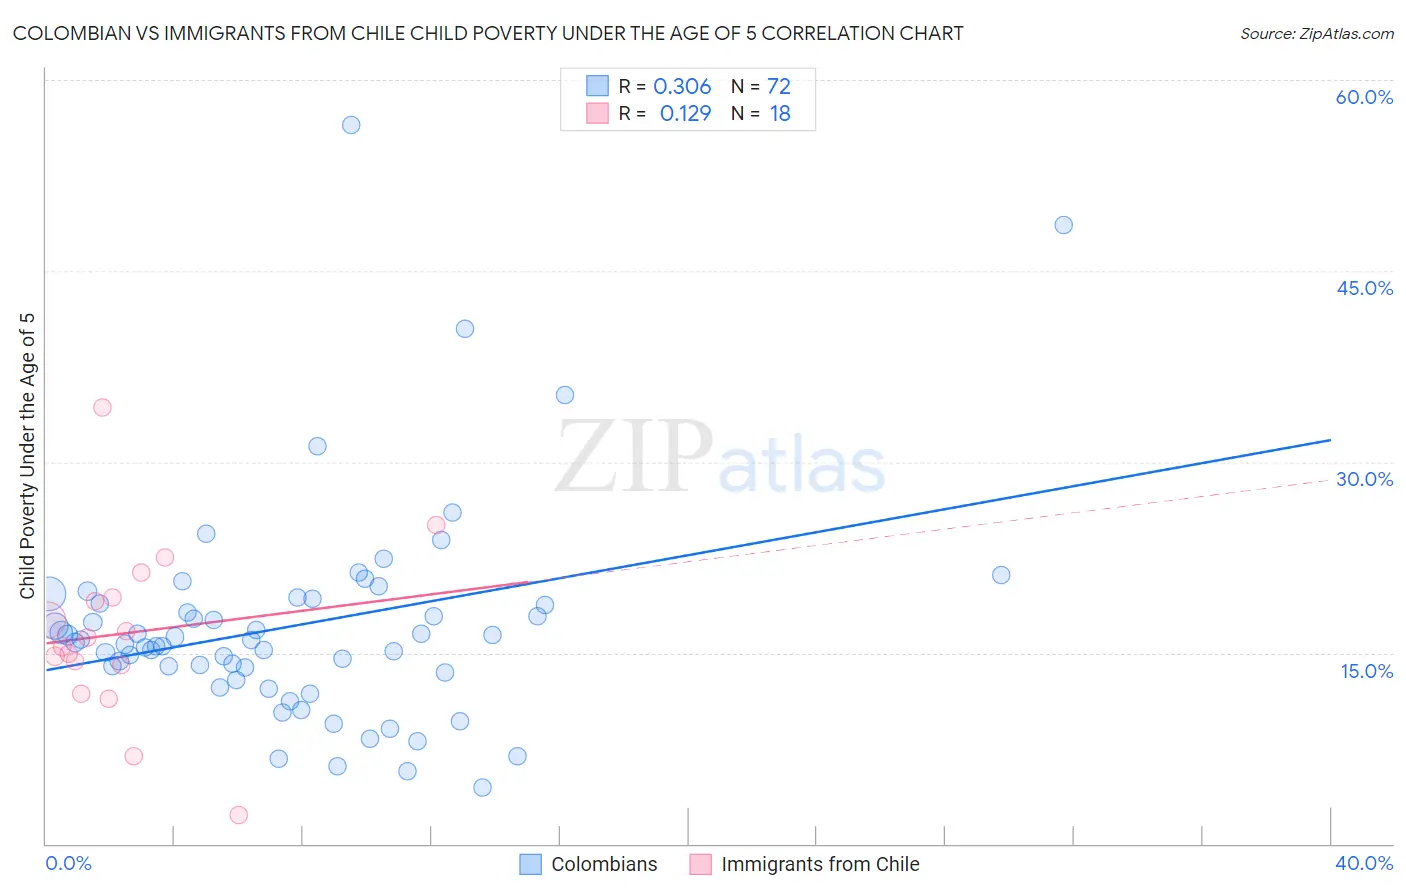 Colombian vs Immigrants from Chile Child Poverty Under the Age of 5